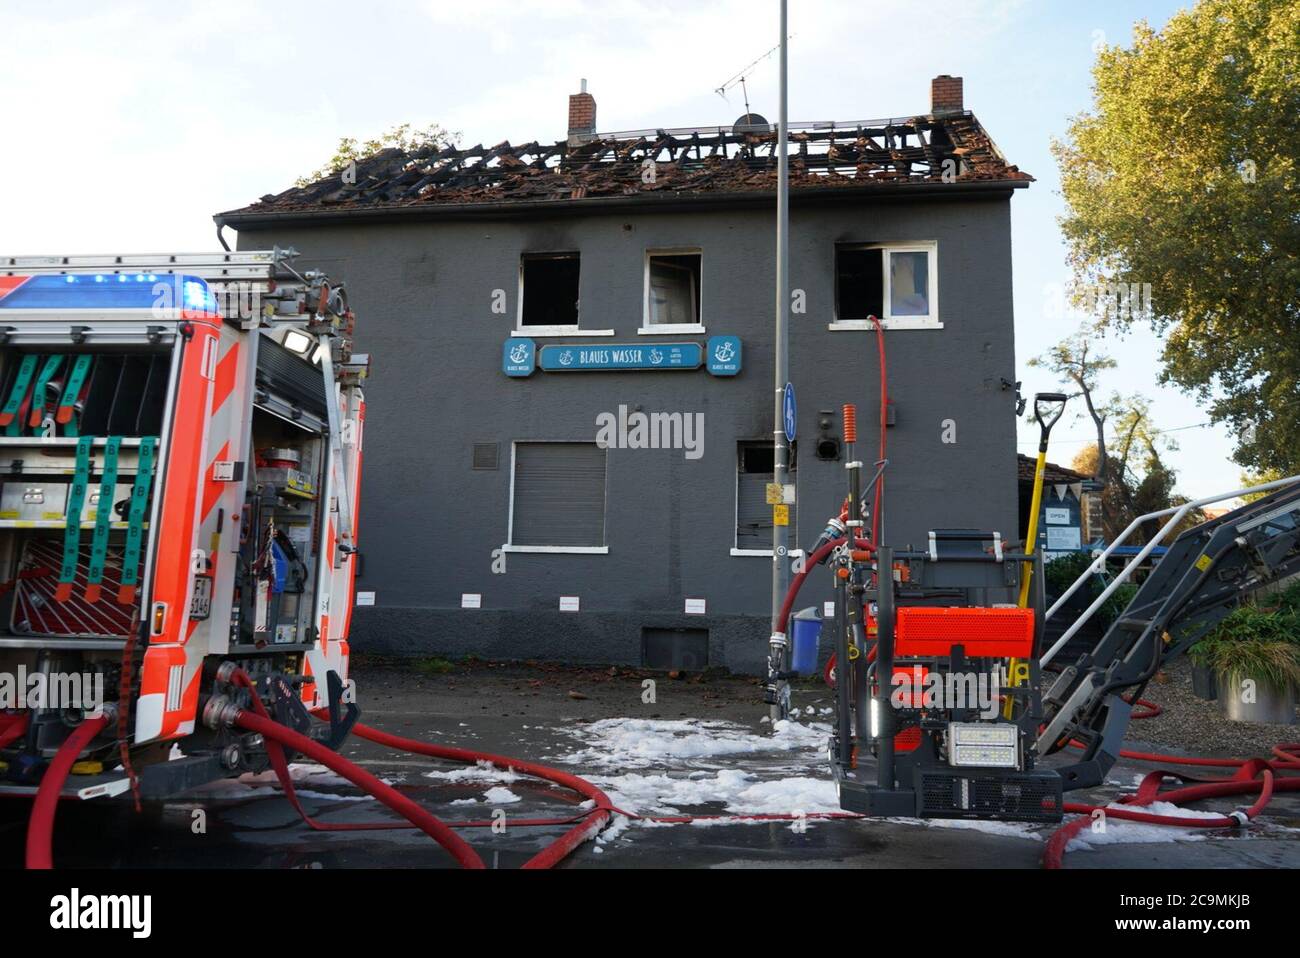 01 August 2020, Frankfurt/Main: Fire engines of the fire brigade are parked in front of the restaurant 'Blaues Wasser', which was severely damaged by a fire. The fire caused damages of about 350,000 euros. Photo: Christian Reinholz/5vision.media/dpa Stock Photo